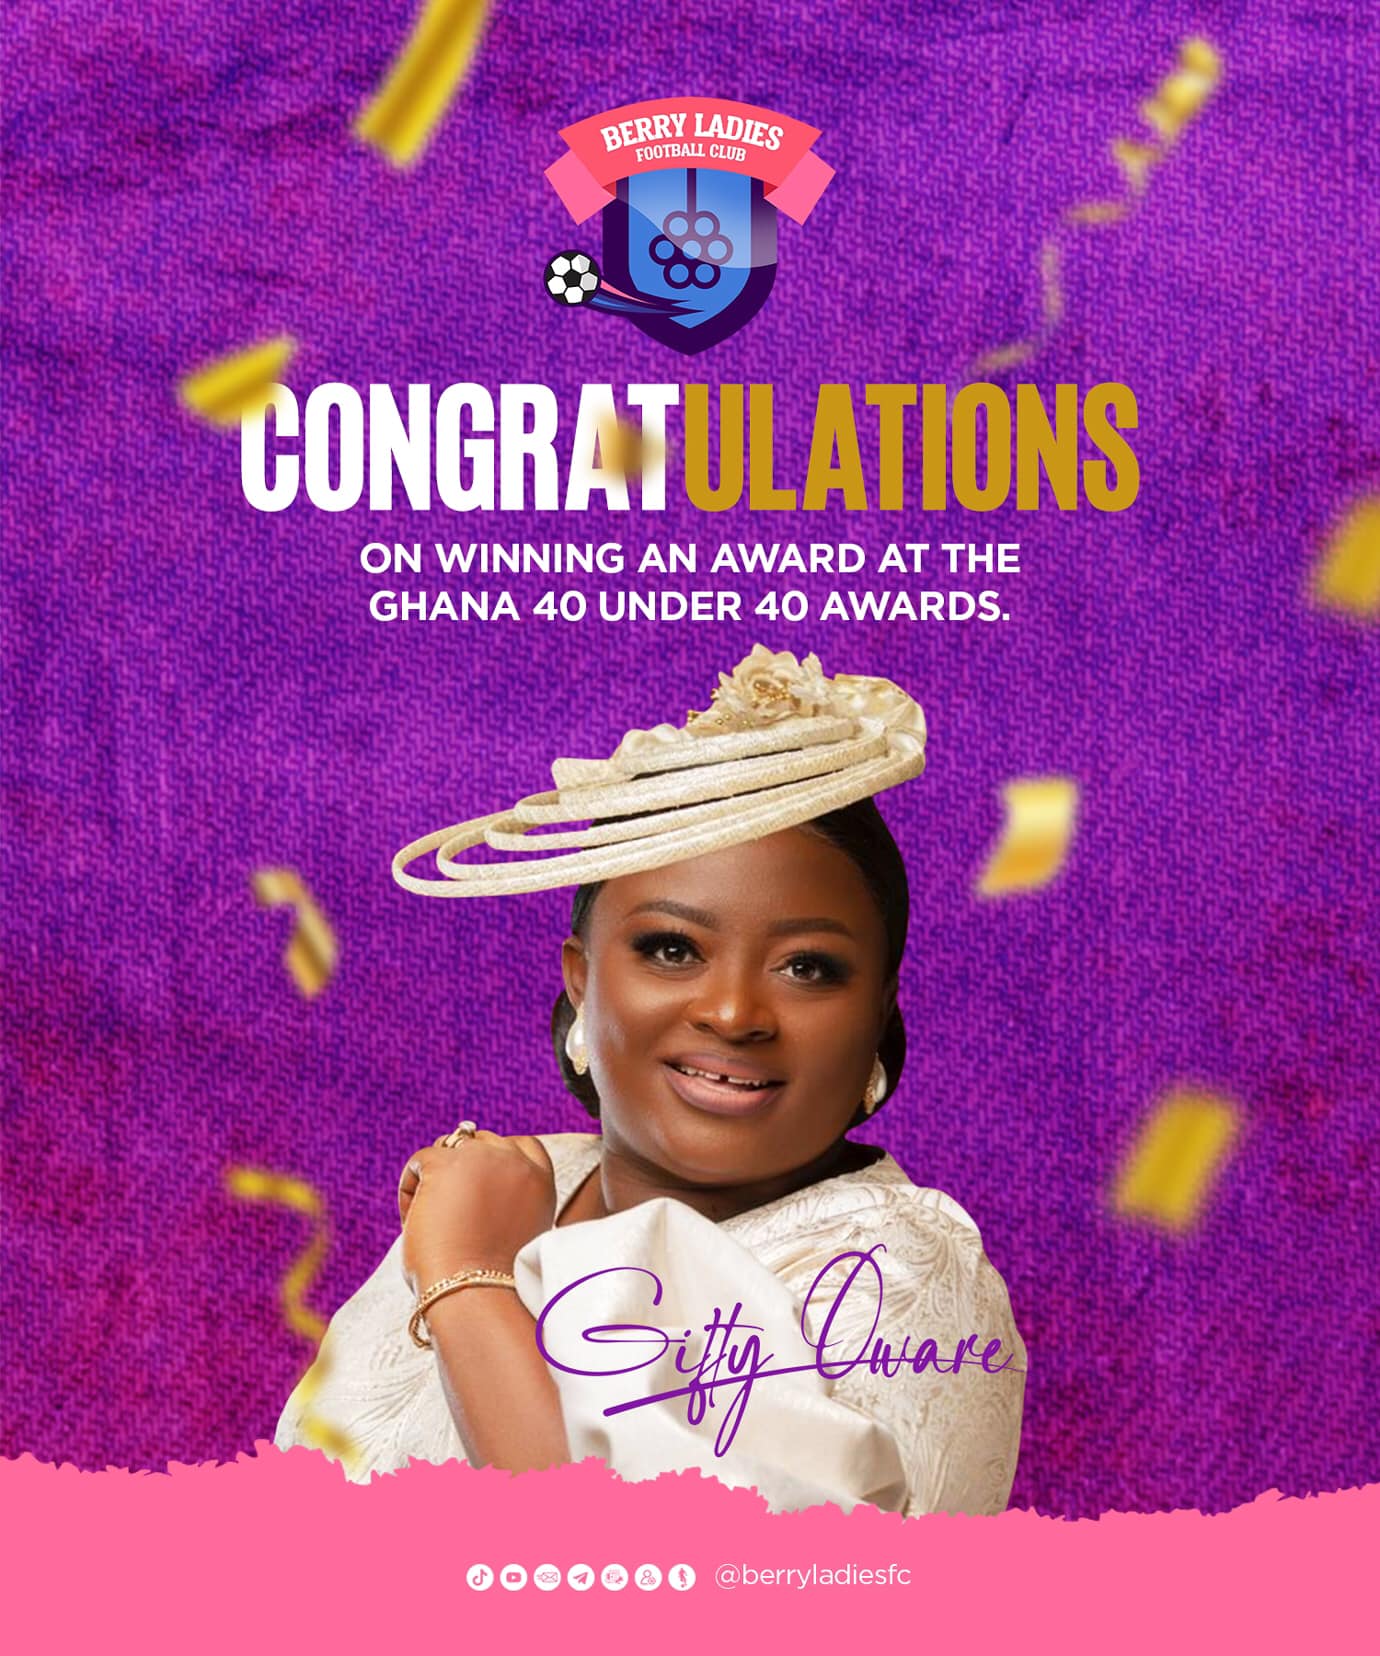 Our CEO, Mrs Gifty Oware-Mensah Grabs 40 under 40 Award